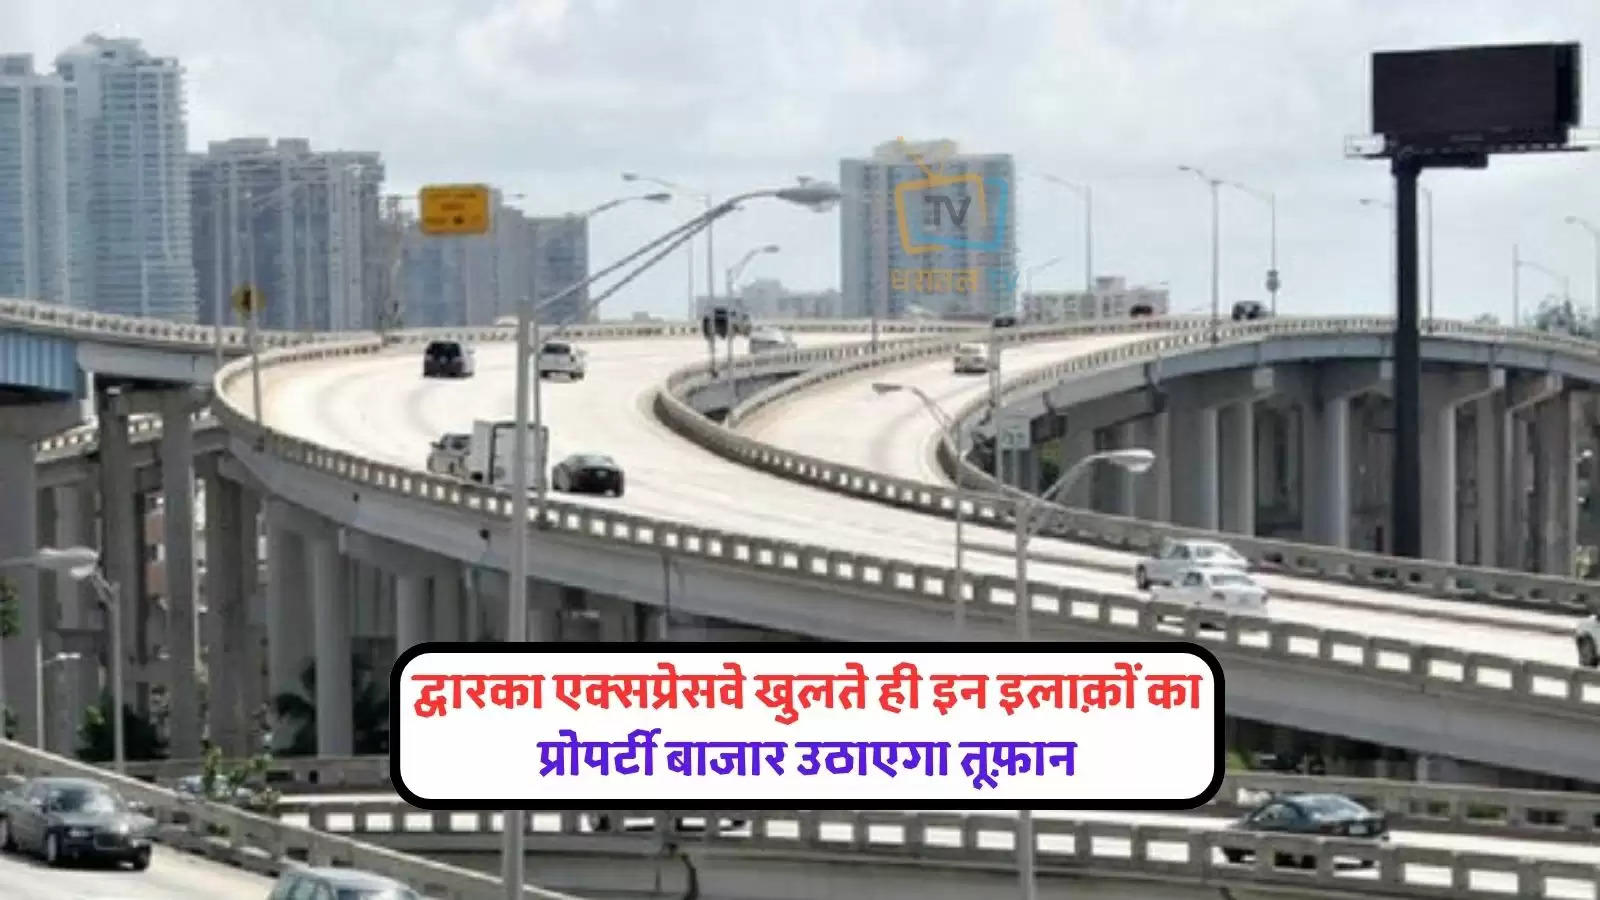 on-the-commencement-of-dwarka-expressway-there-will-be